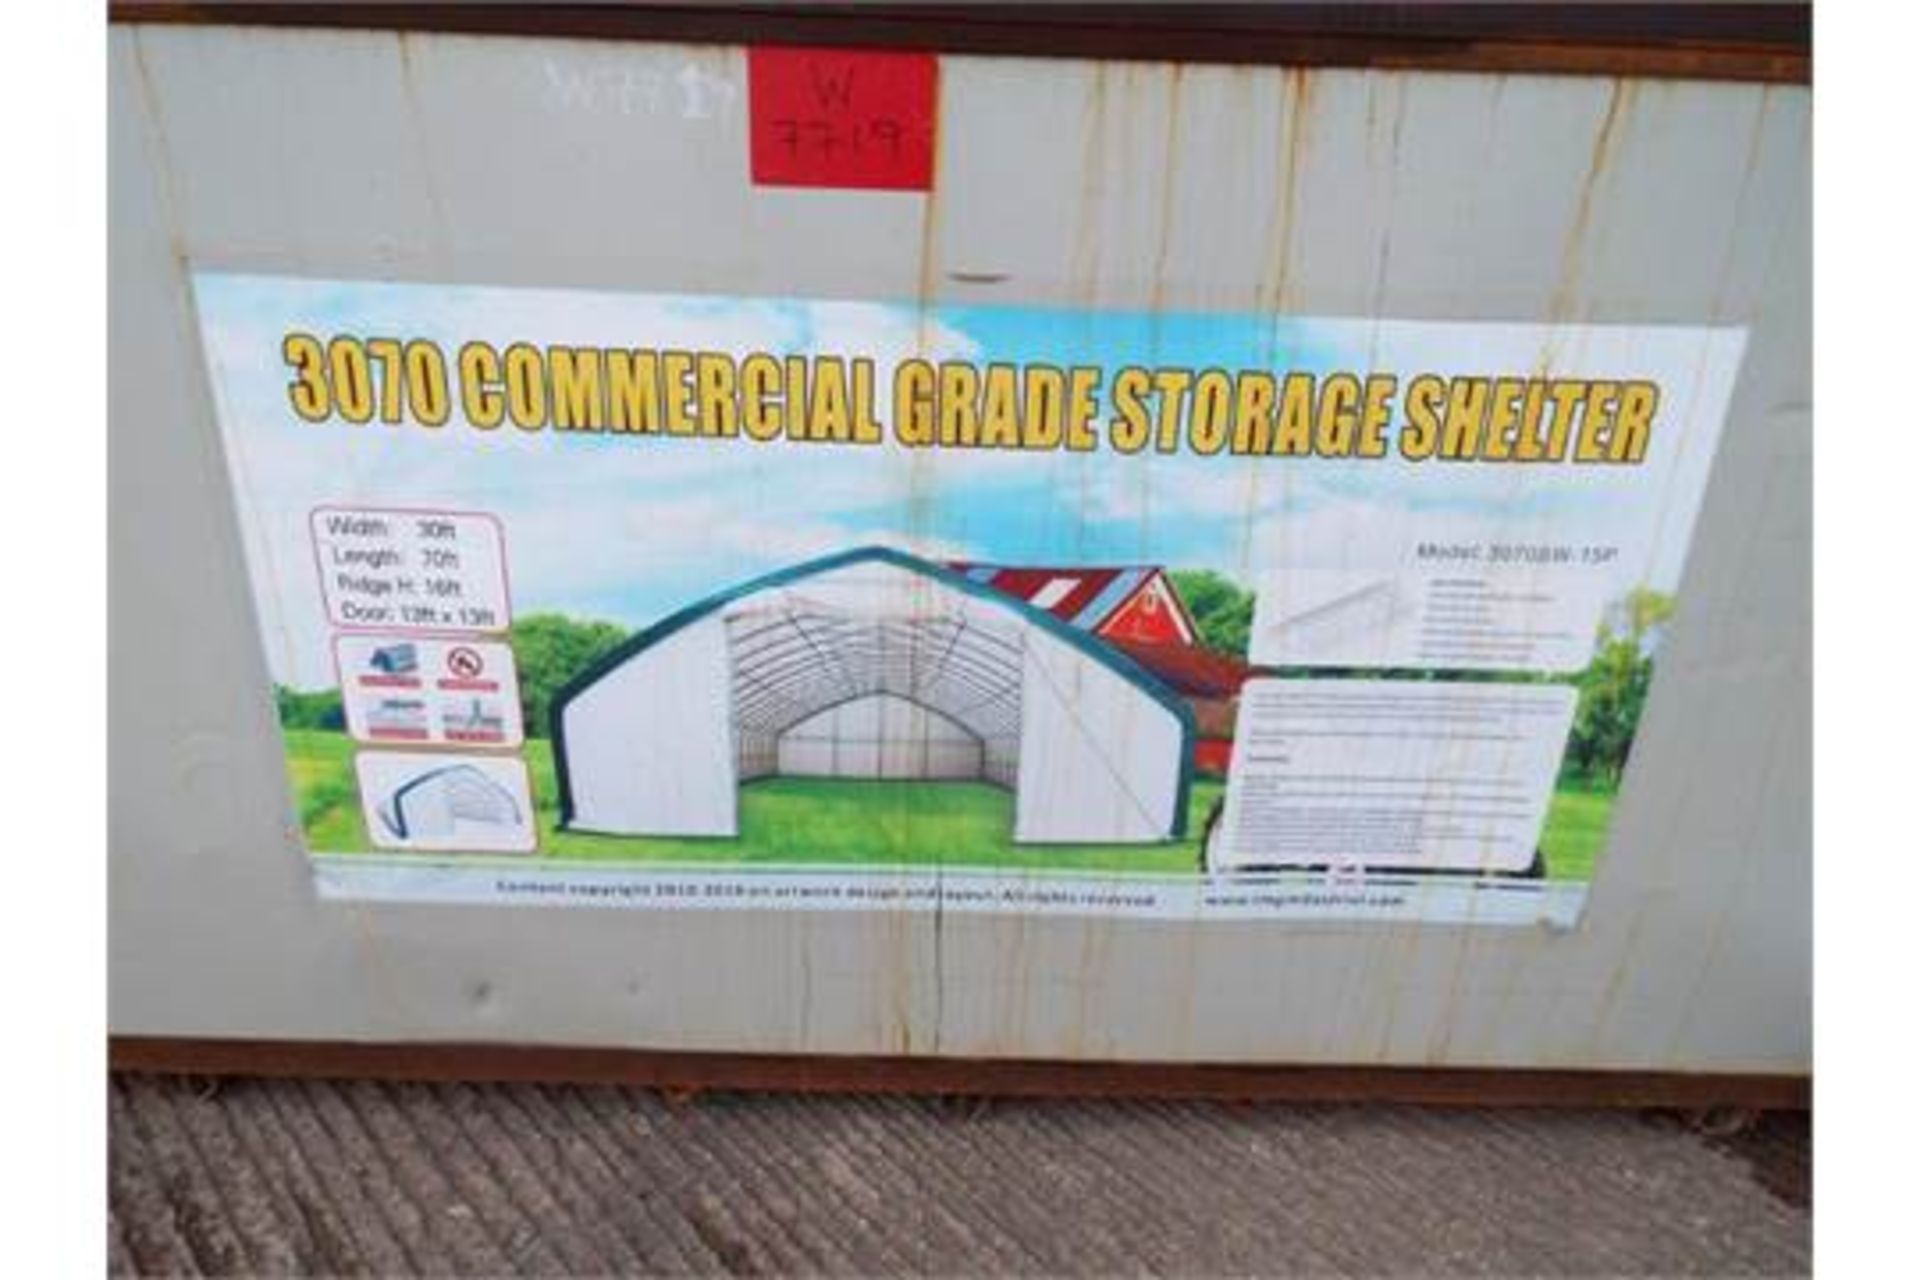 Heavy Duty Storage Shelter 30'W x 70'L x 16' H P/No 3050SW-11P - Image 6 of 6